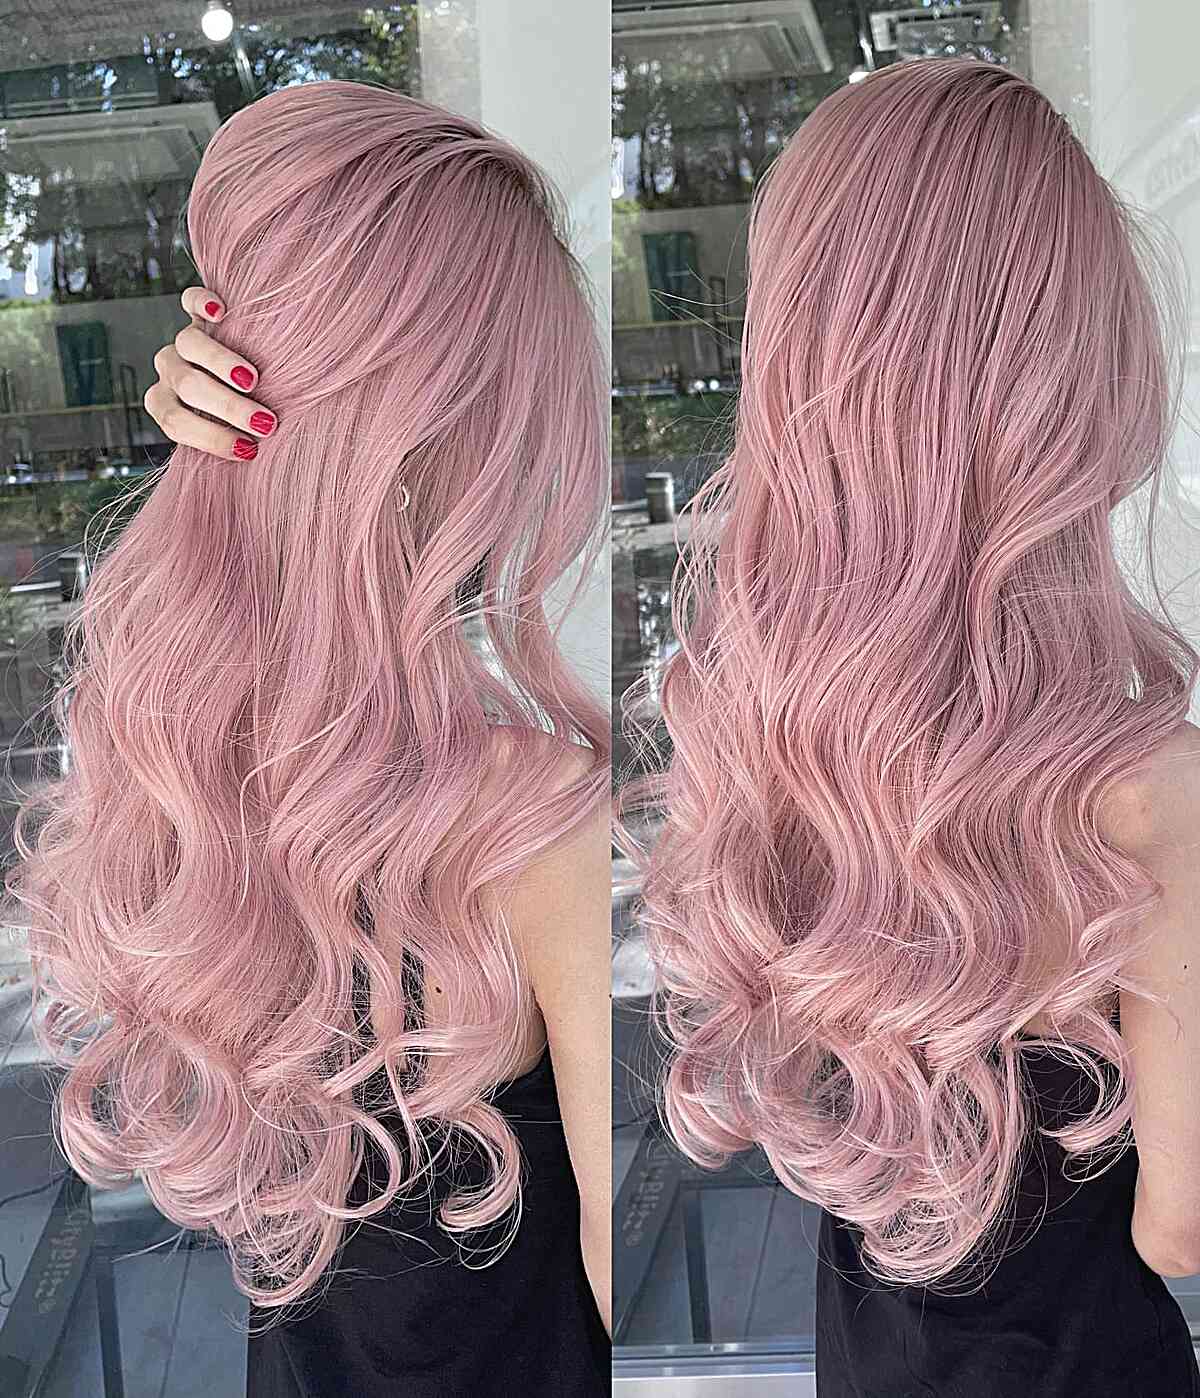 Stylish Long Pink Curled Ends for women with fine hair